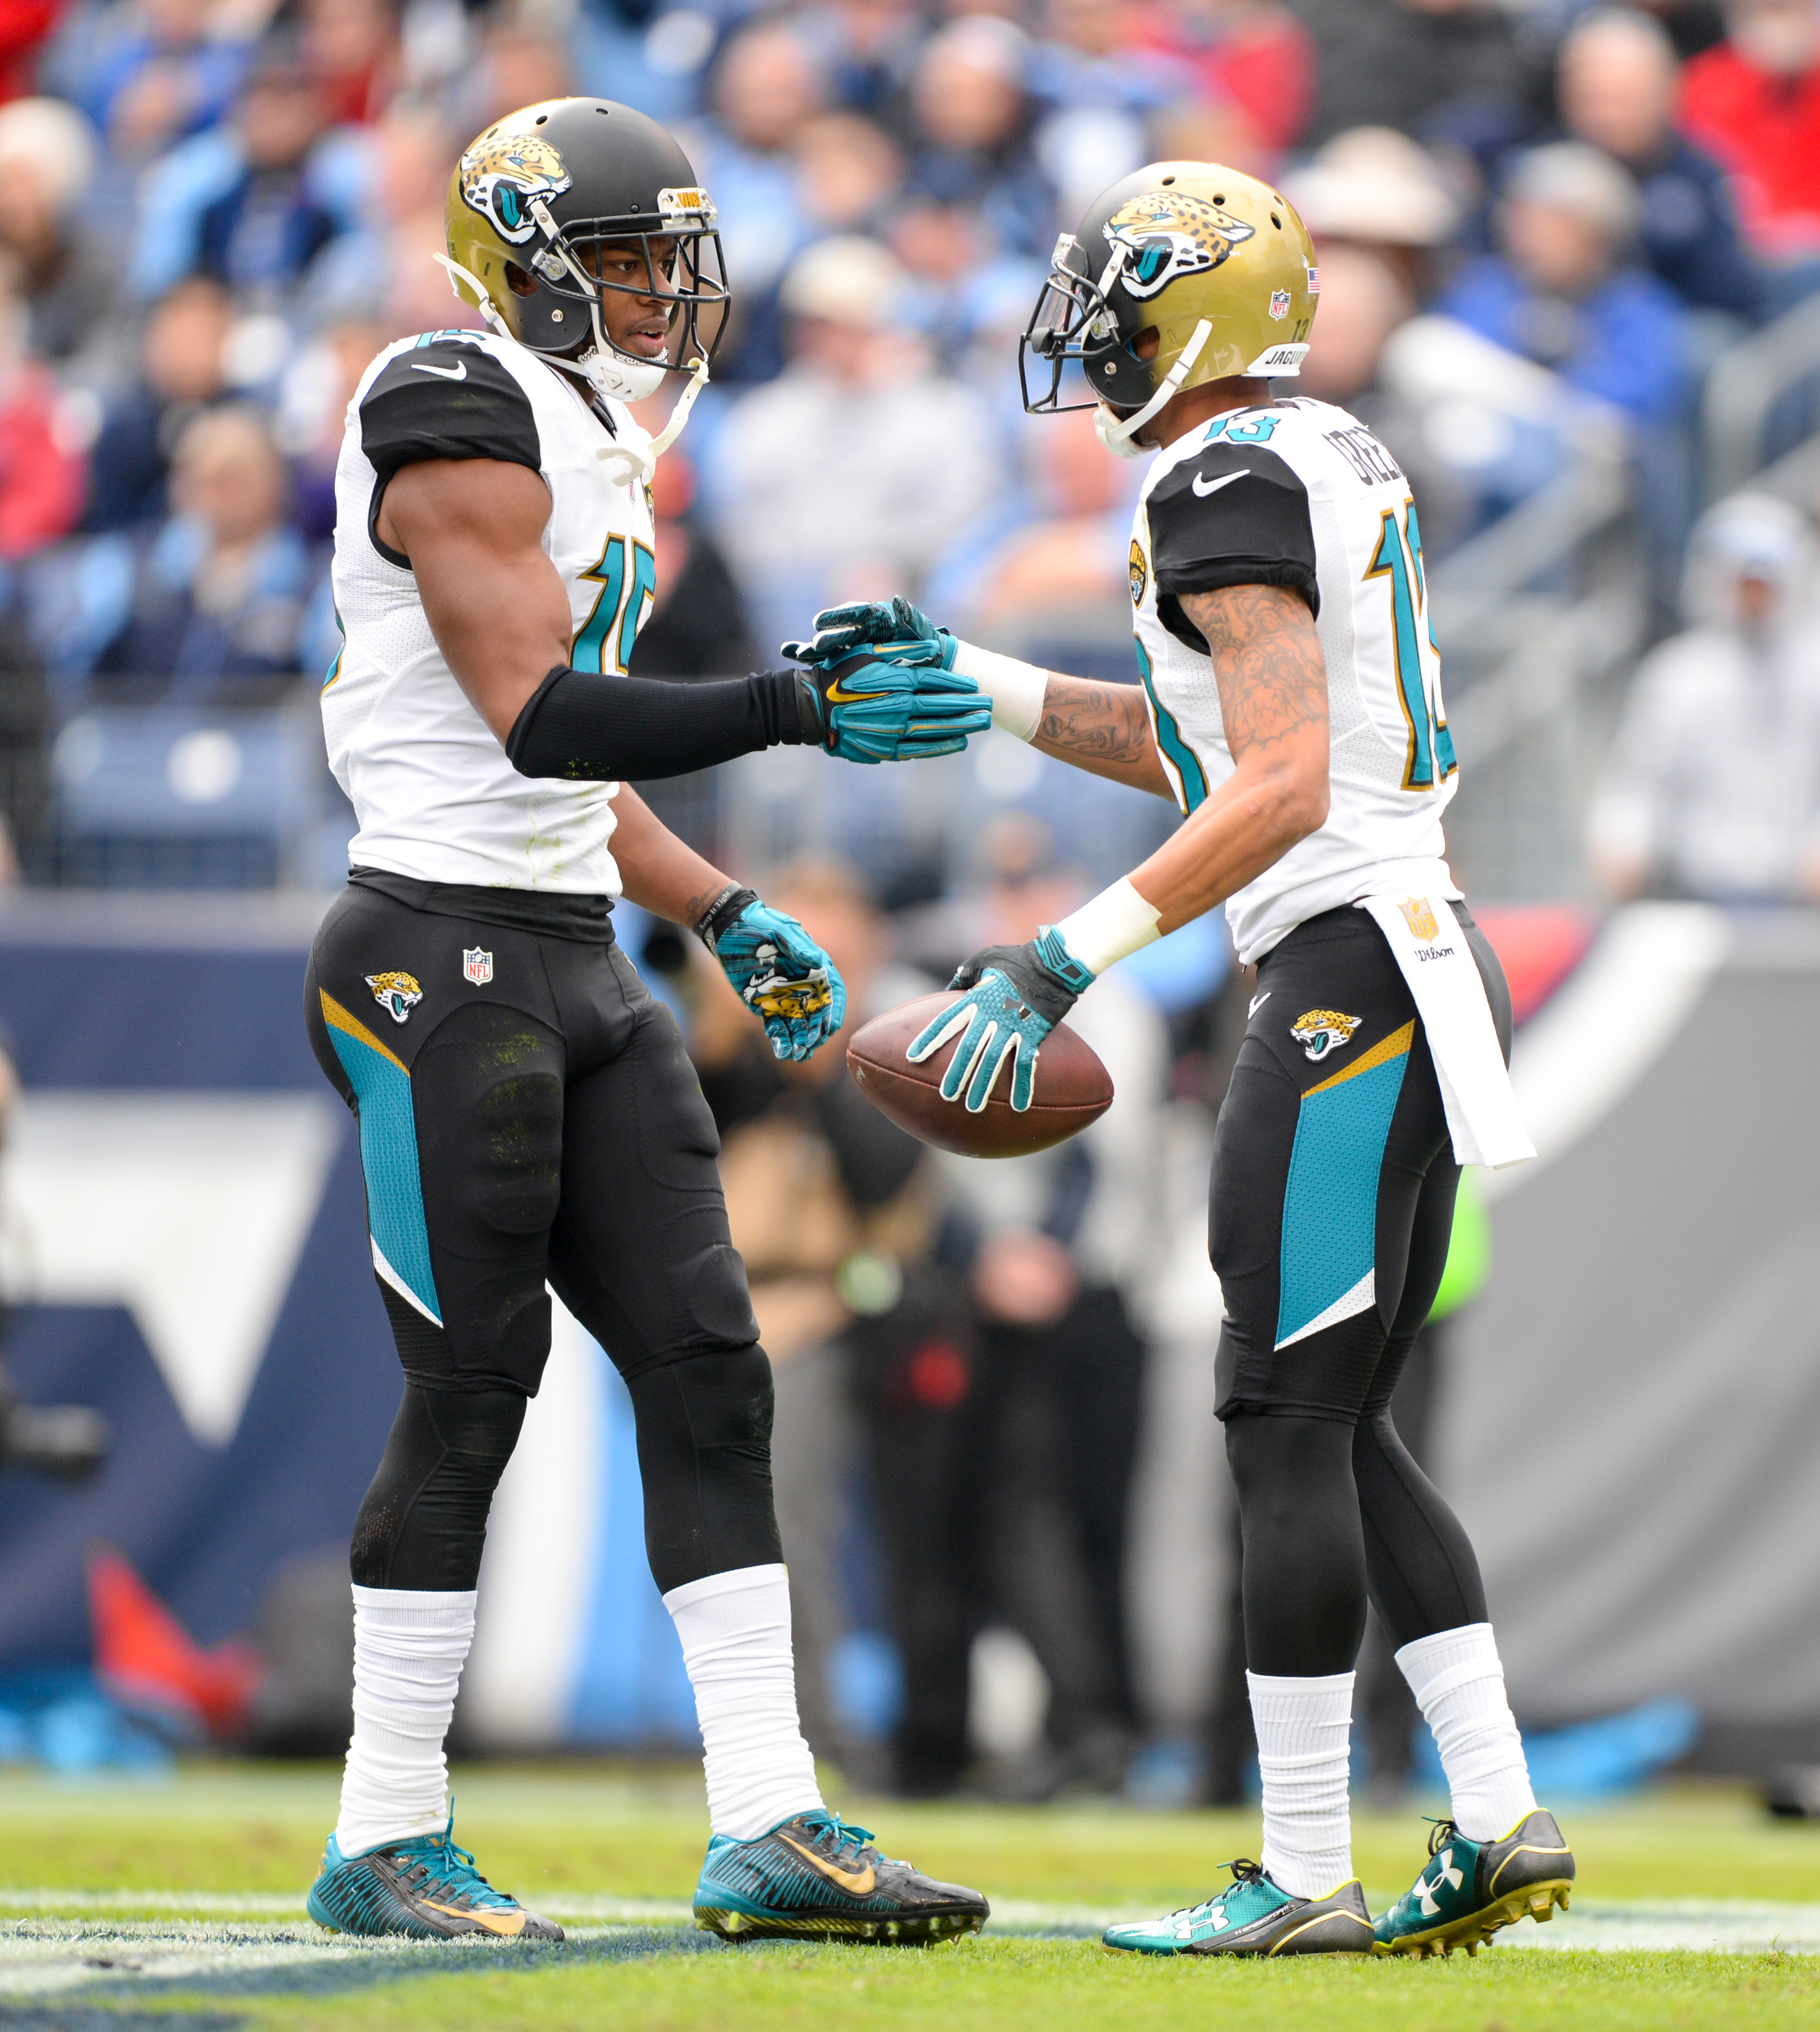 Jacksonville and Tennessee combined for many more points Sunday, scoring six touchdowns in the fourth quarter, tying an NFL record for the second-most TDs in a fourth quarter since 1940. The Jaguars host the Colts Sunday.